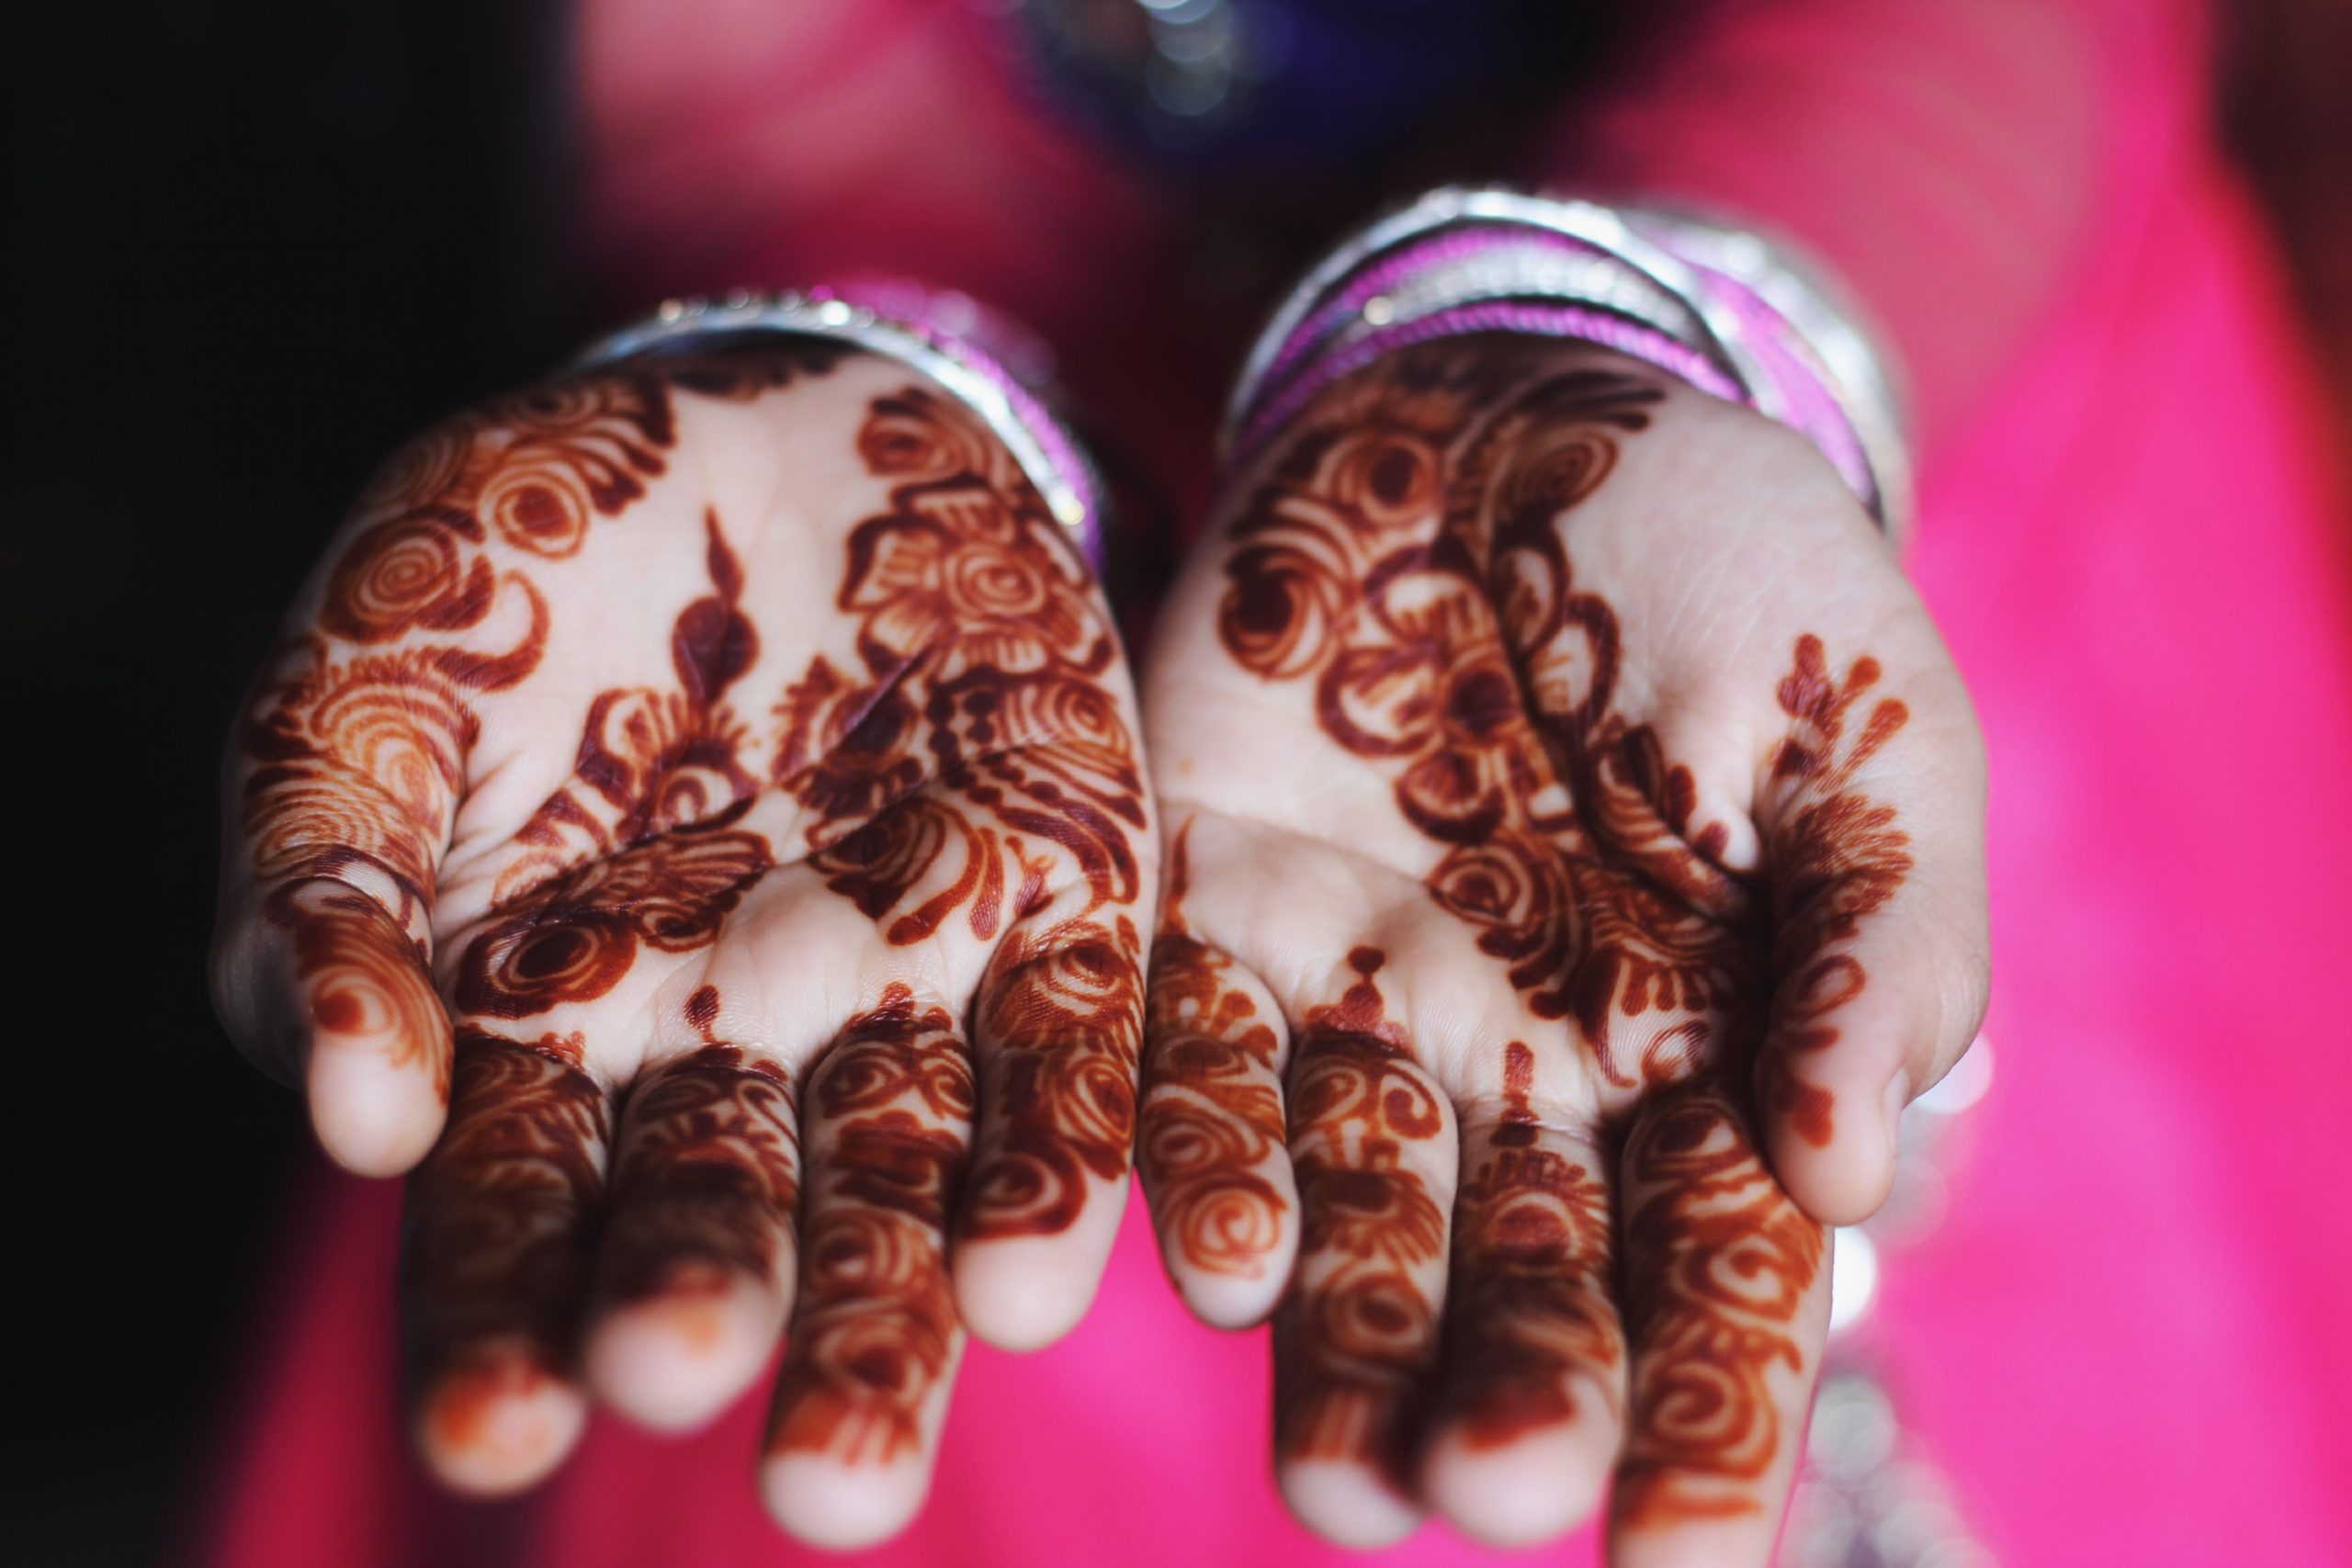 Hands adorned with decorative henna tattoos